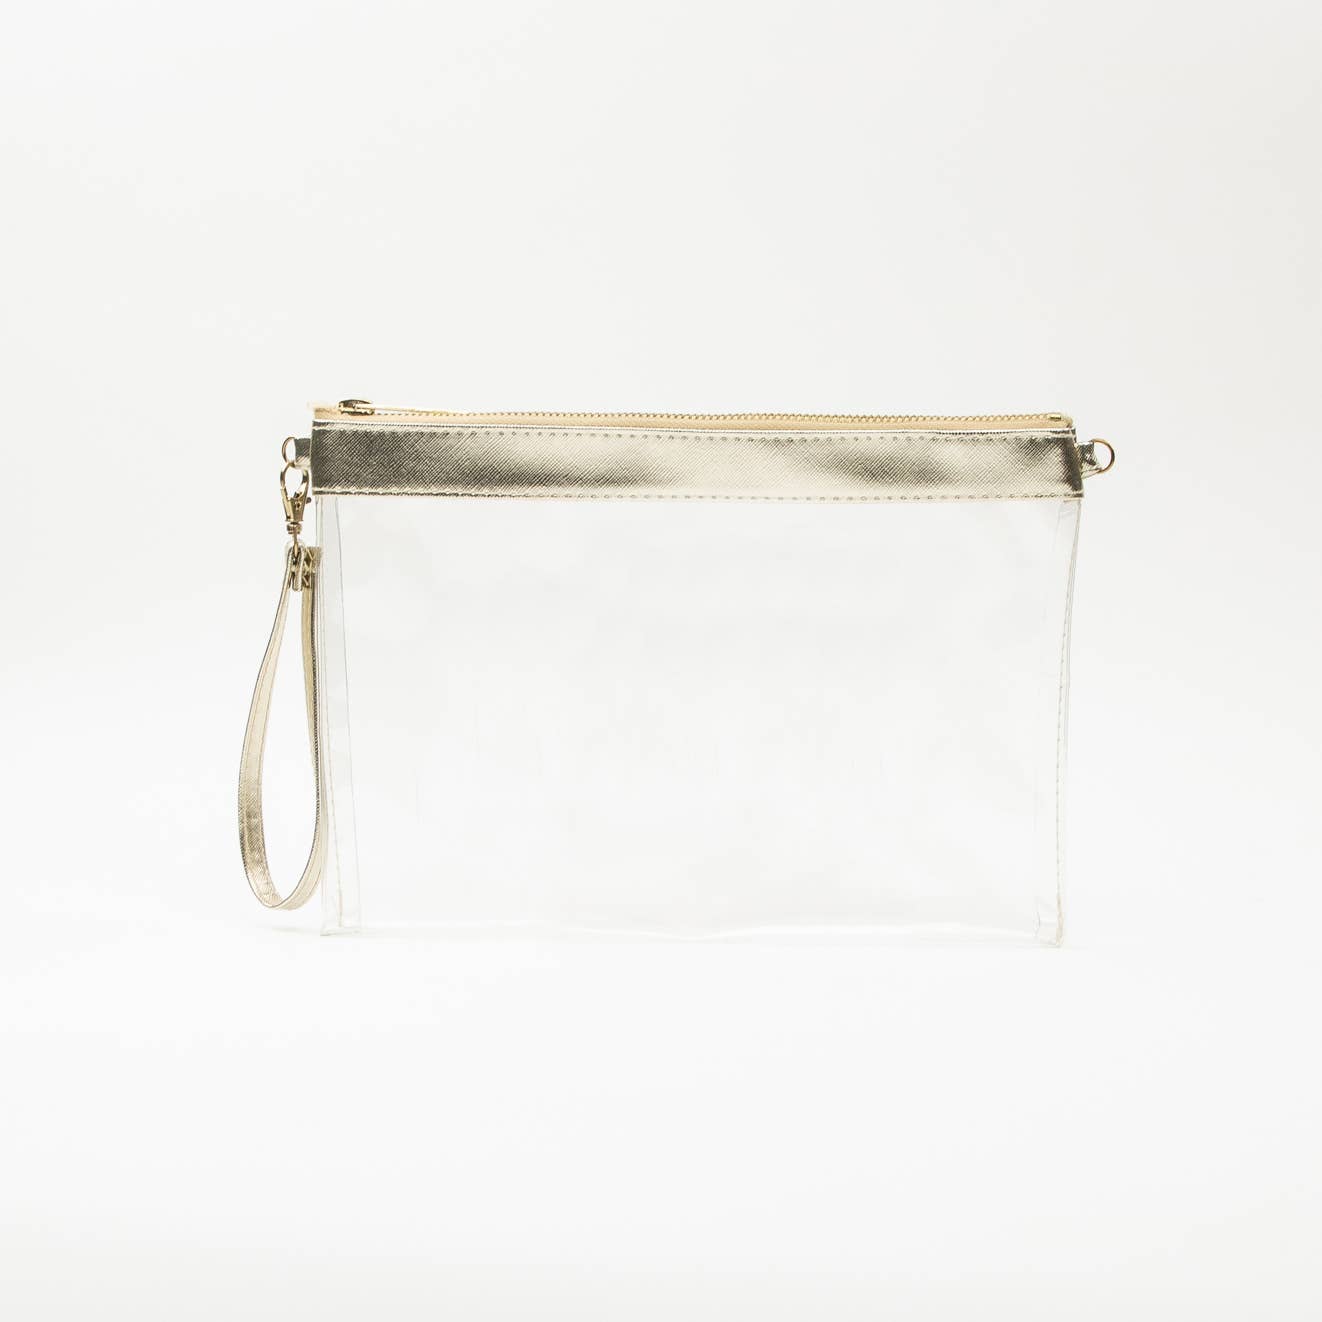 CLEAR TRAVEL BAG: GOLD